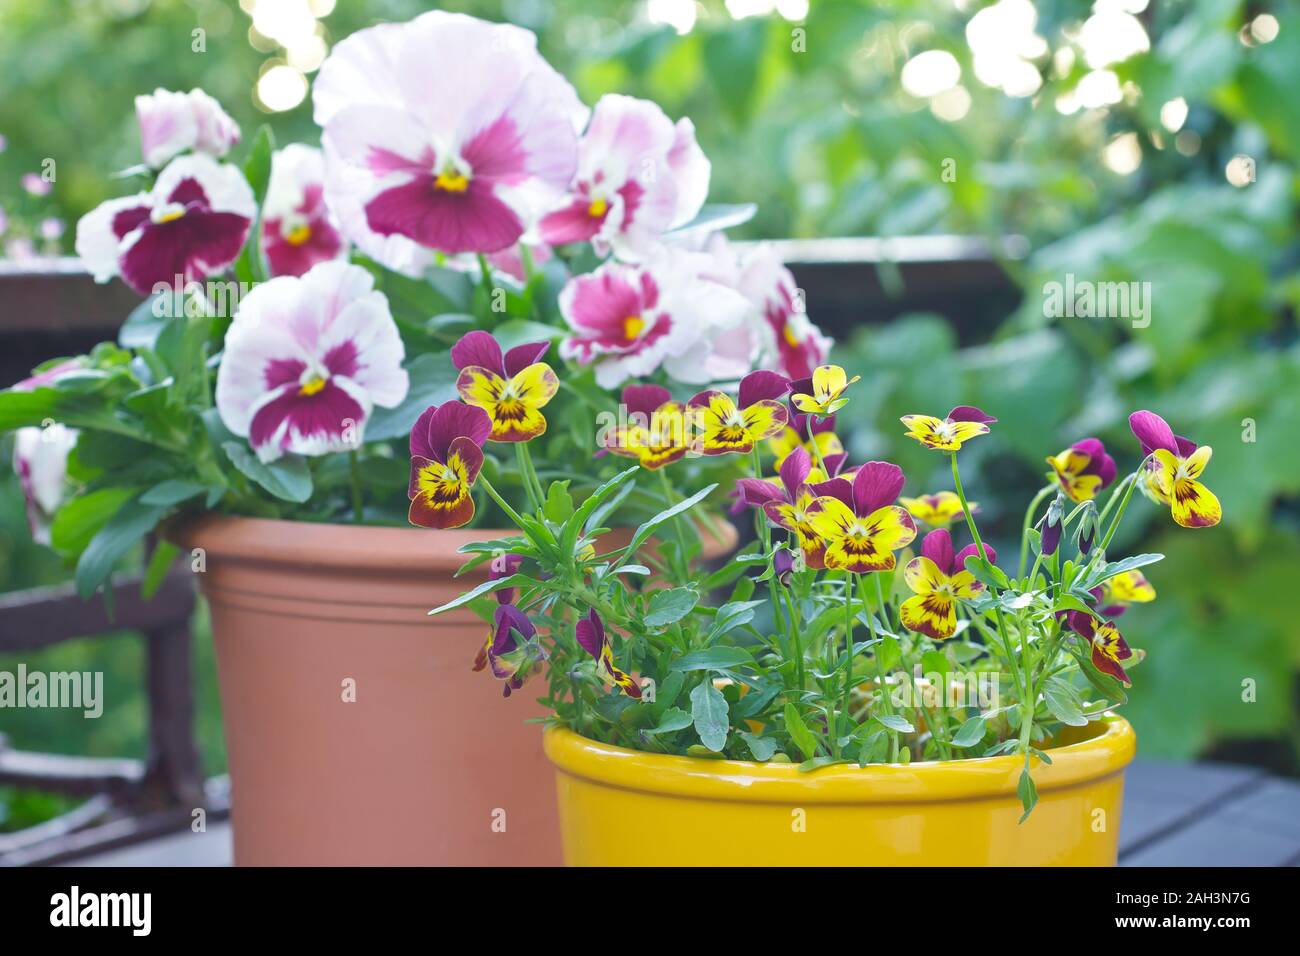 Pink, purple and yellow tufted and garden pansy plants in 2 pots on a balcony table, copy space. Stock Photo